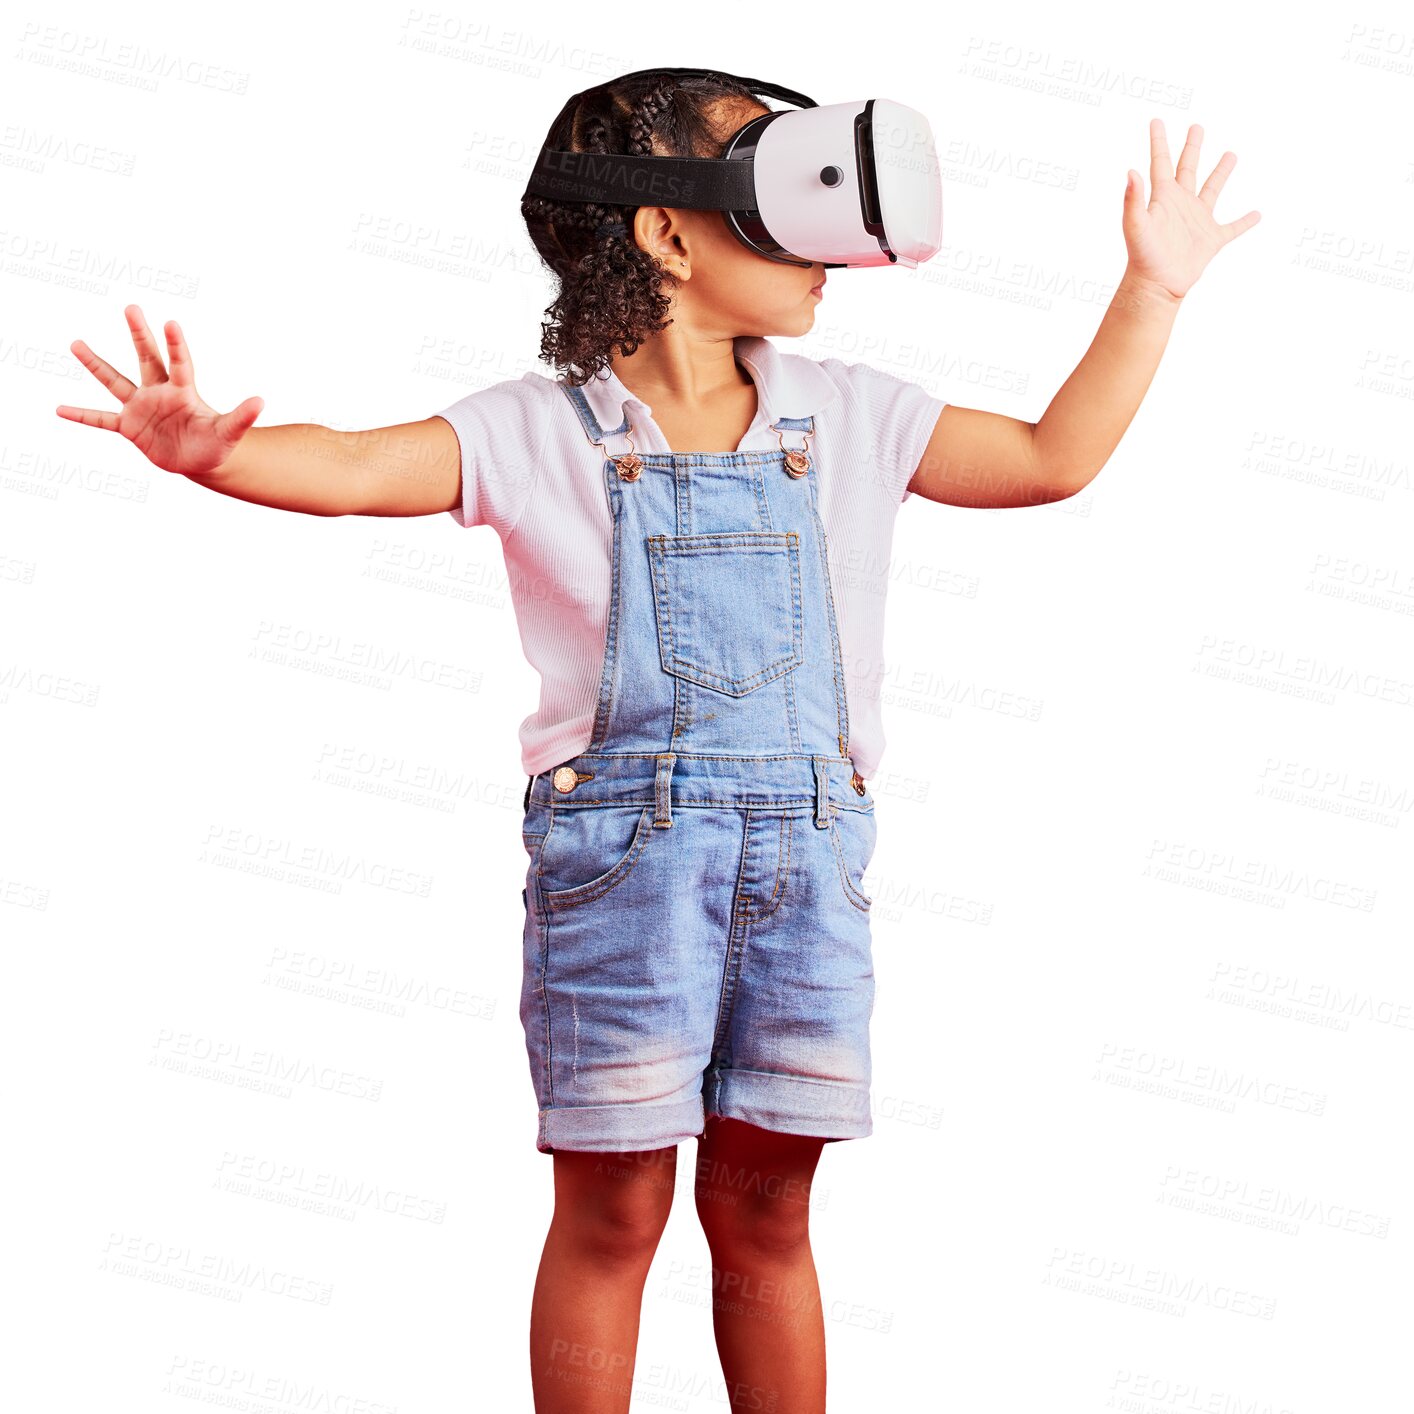 Buy stock photo Child, girl with virtual reality and metaverse, gaming and experience isolated on png transparent background. Digital world, 3D and young female kid, VR goggles and video games with future technology